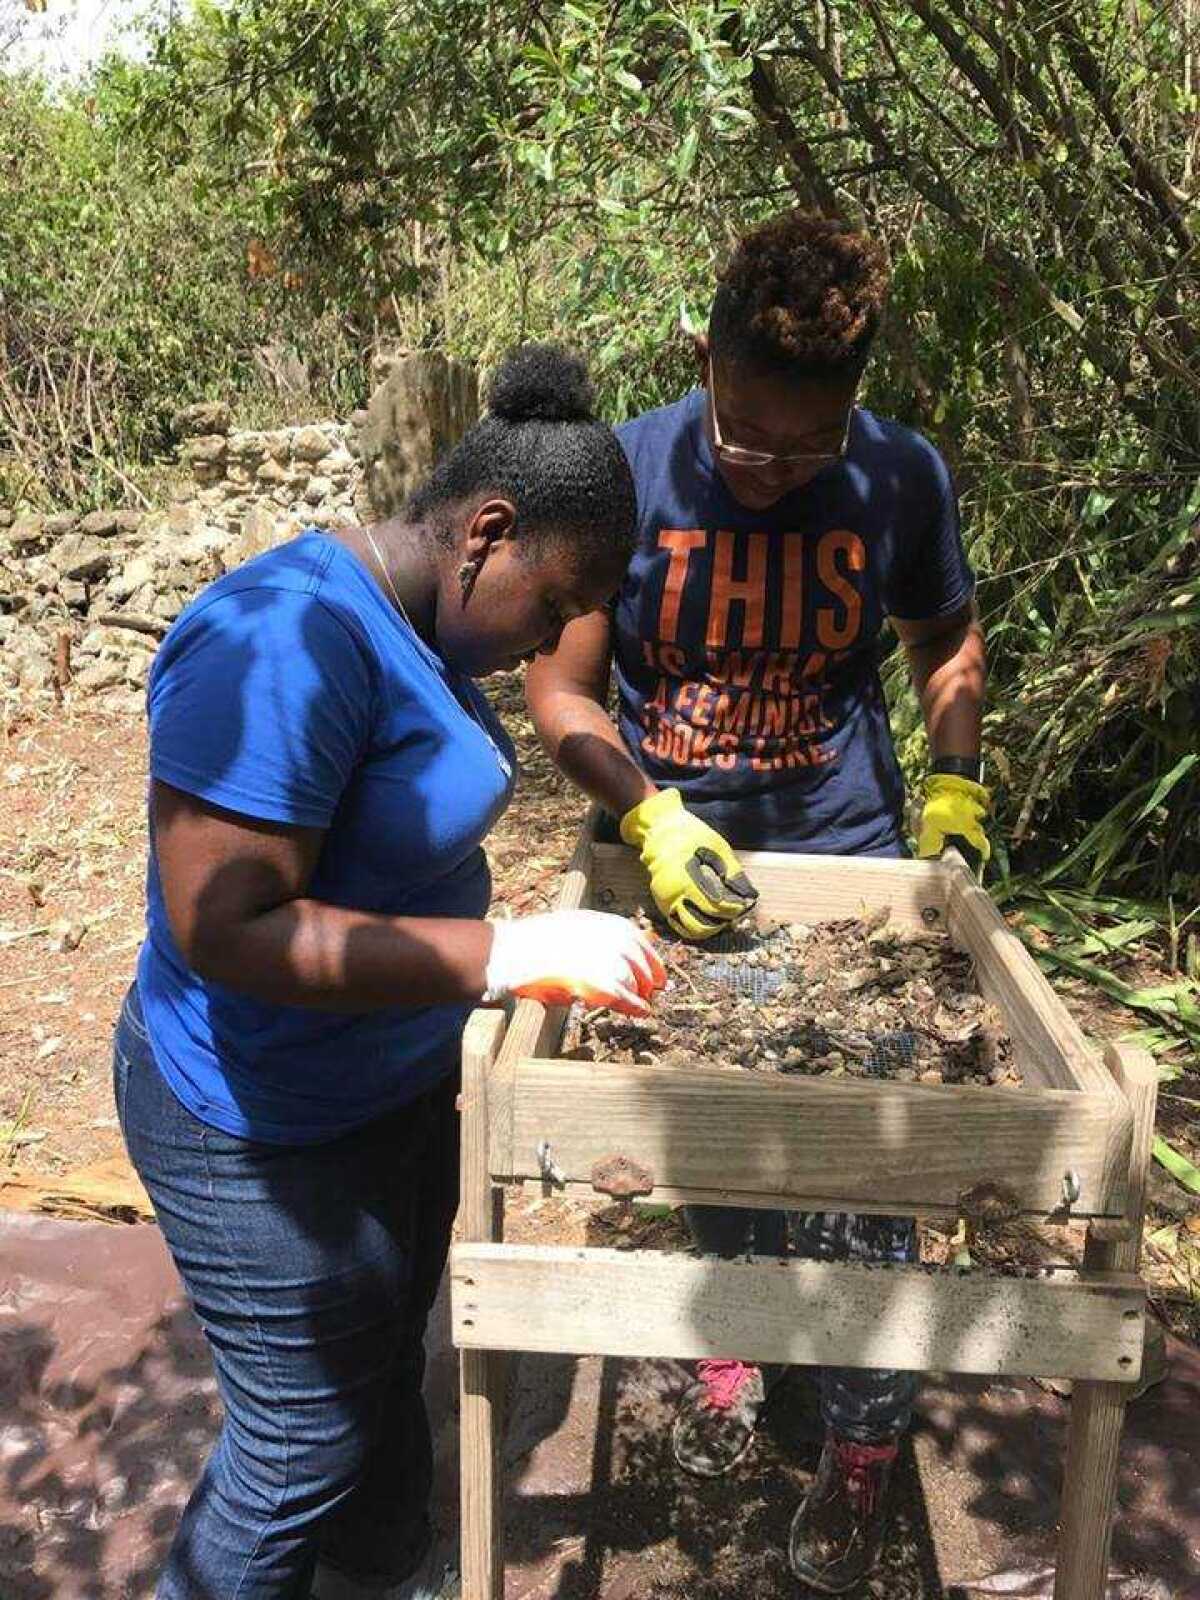 Ayana Omilade Flewellen, left, works alongside a participant in a youth archaeology program